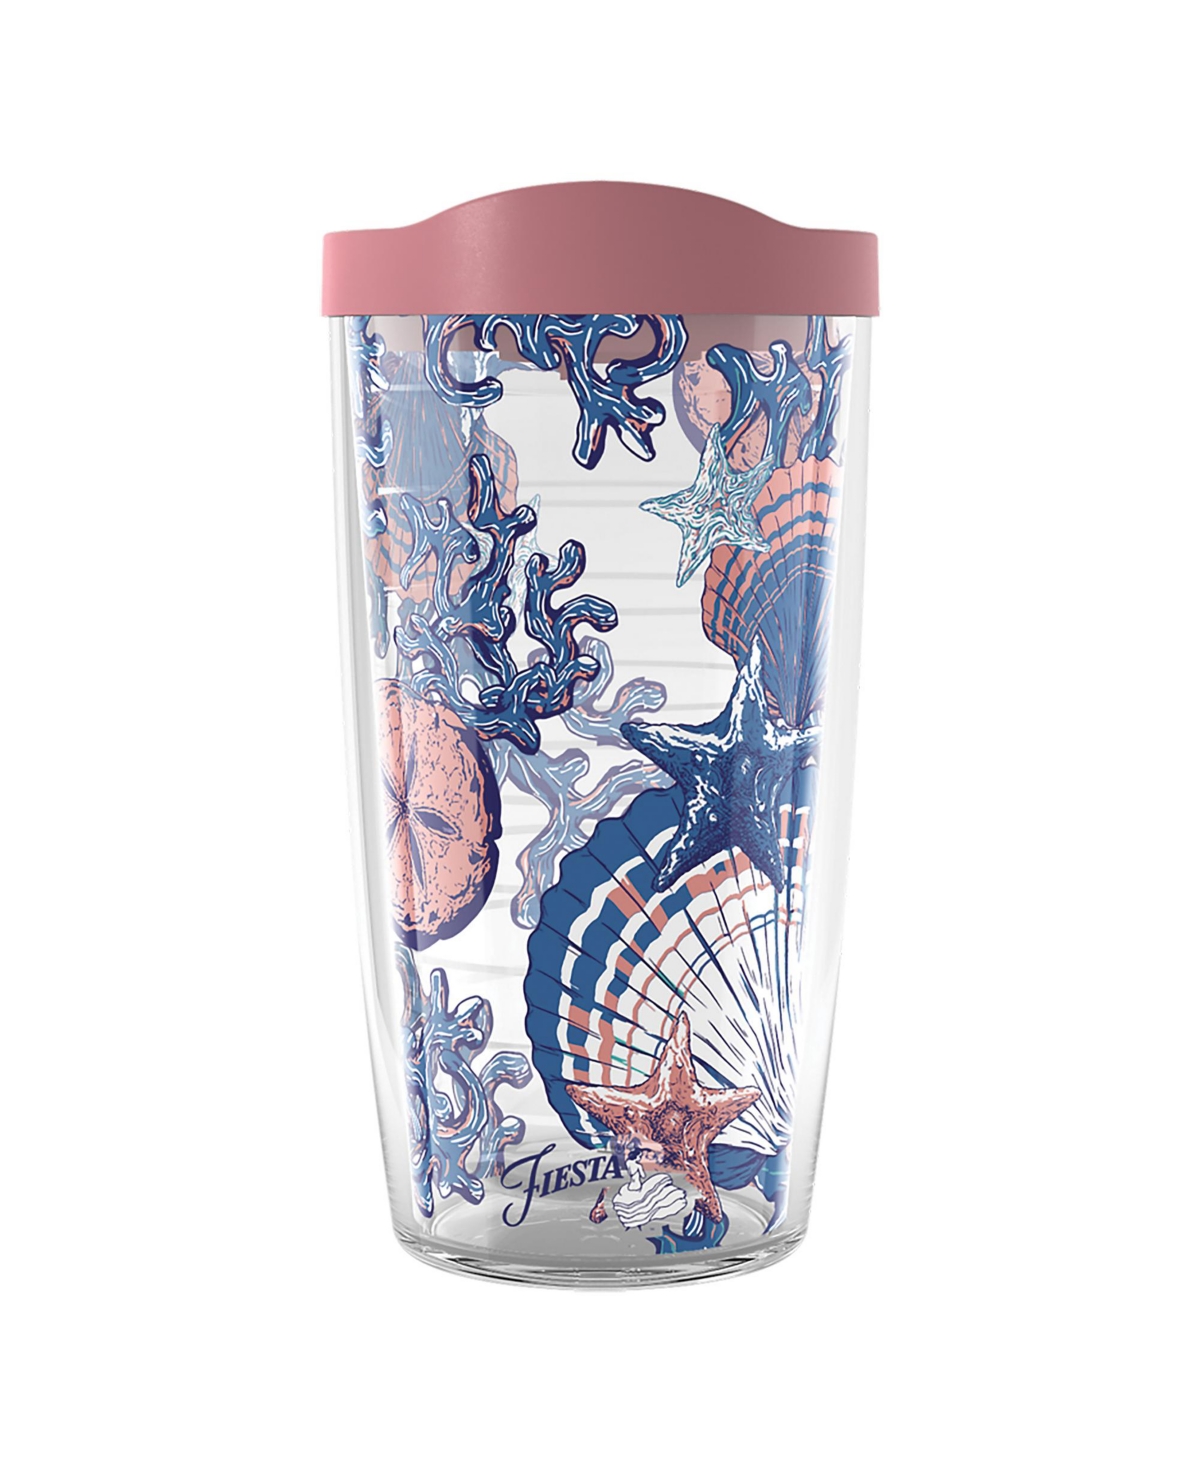 Tervis Tumbler Tervis Fiesta Coral Connection Made In Usa Double Walled Insulated Tumbler Travel Cup Keeps Drinks C In Open Miscellaneous